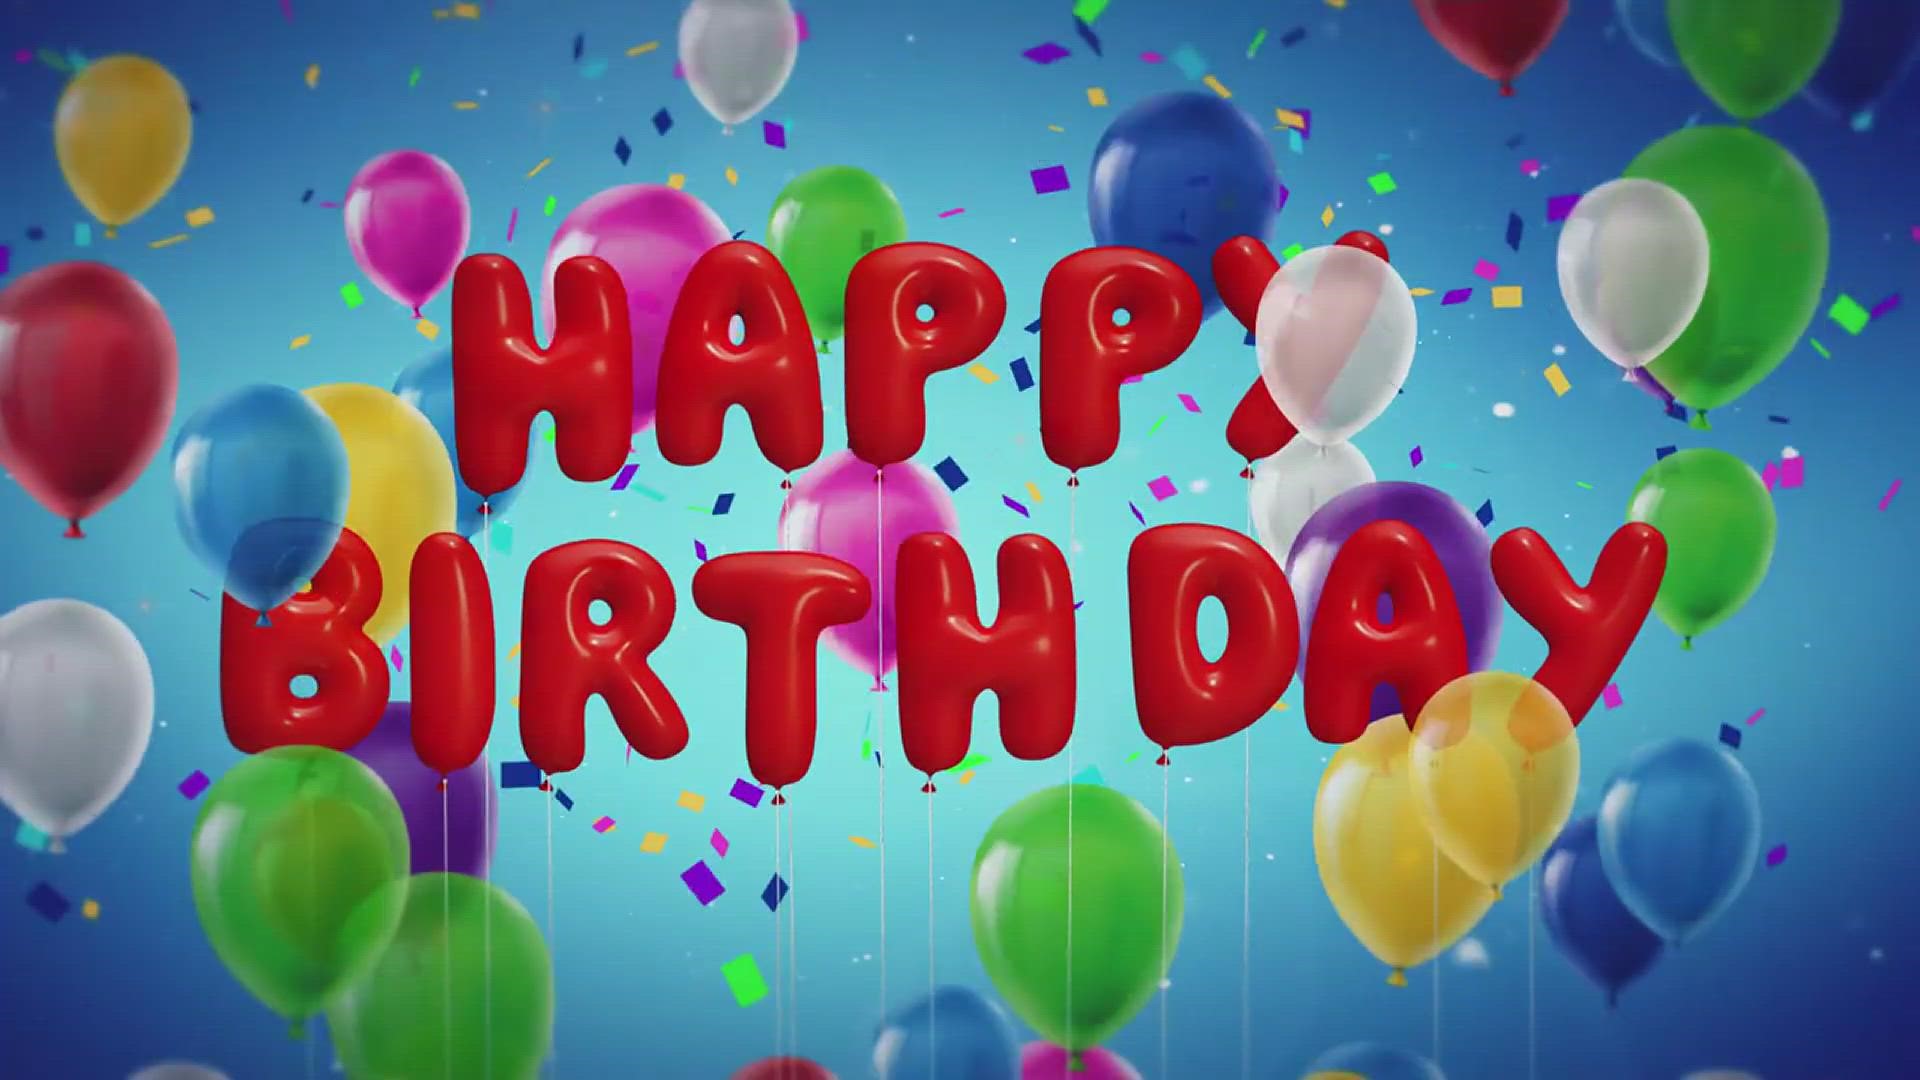 Bookmark this video to save it! Submit birthdays and enter the cookie contest by visiting 12NewsNow.com/Birthdays BEFORE midnight the night before the birthday.